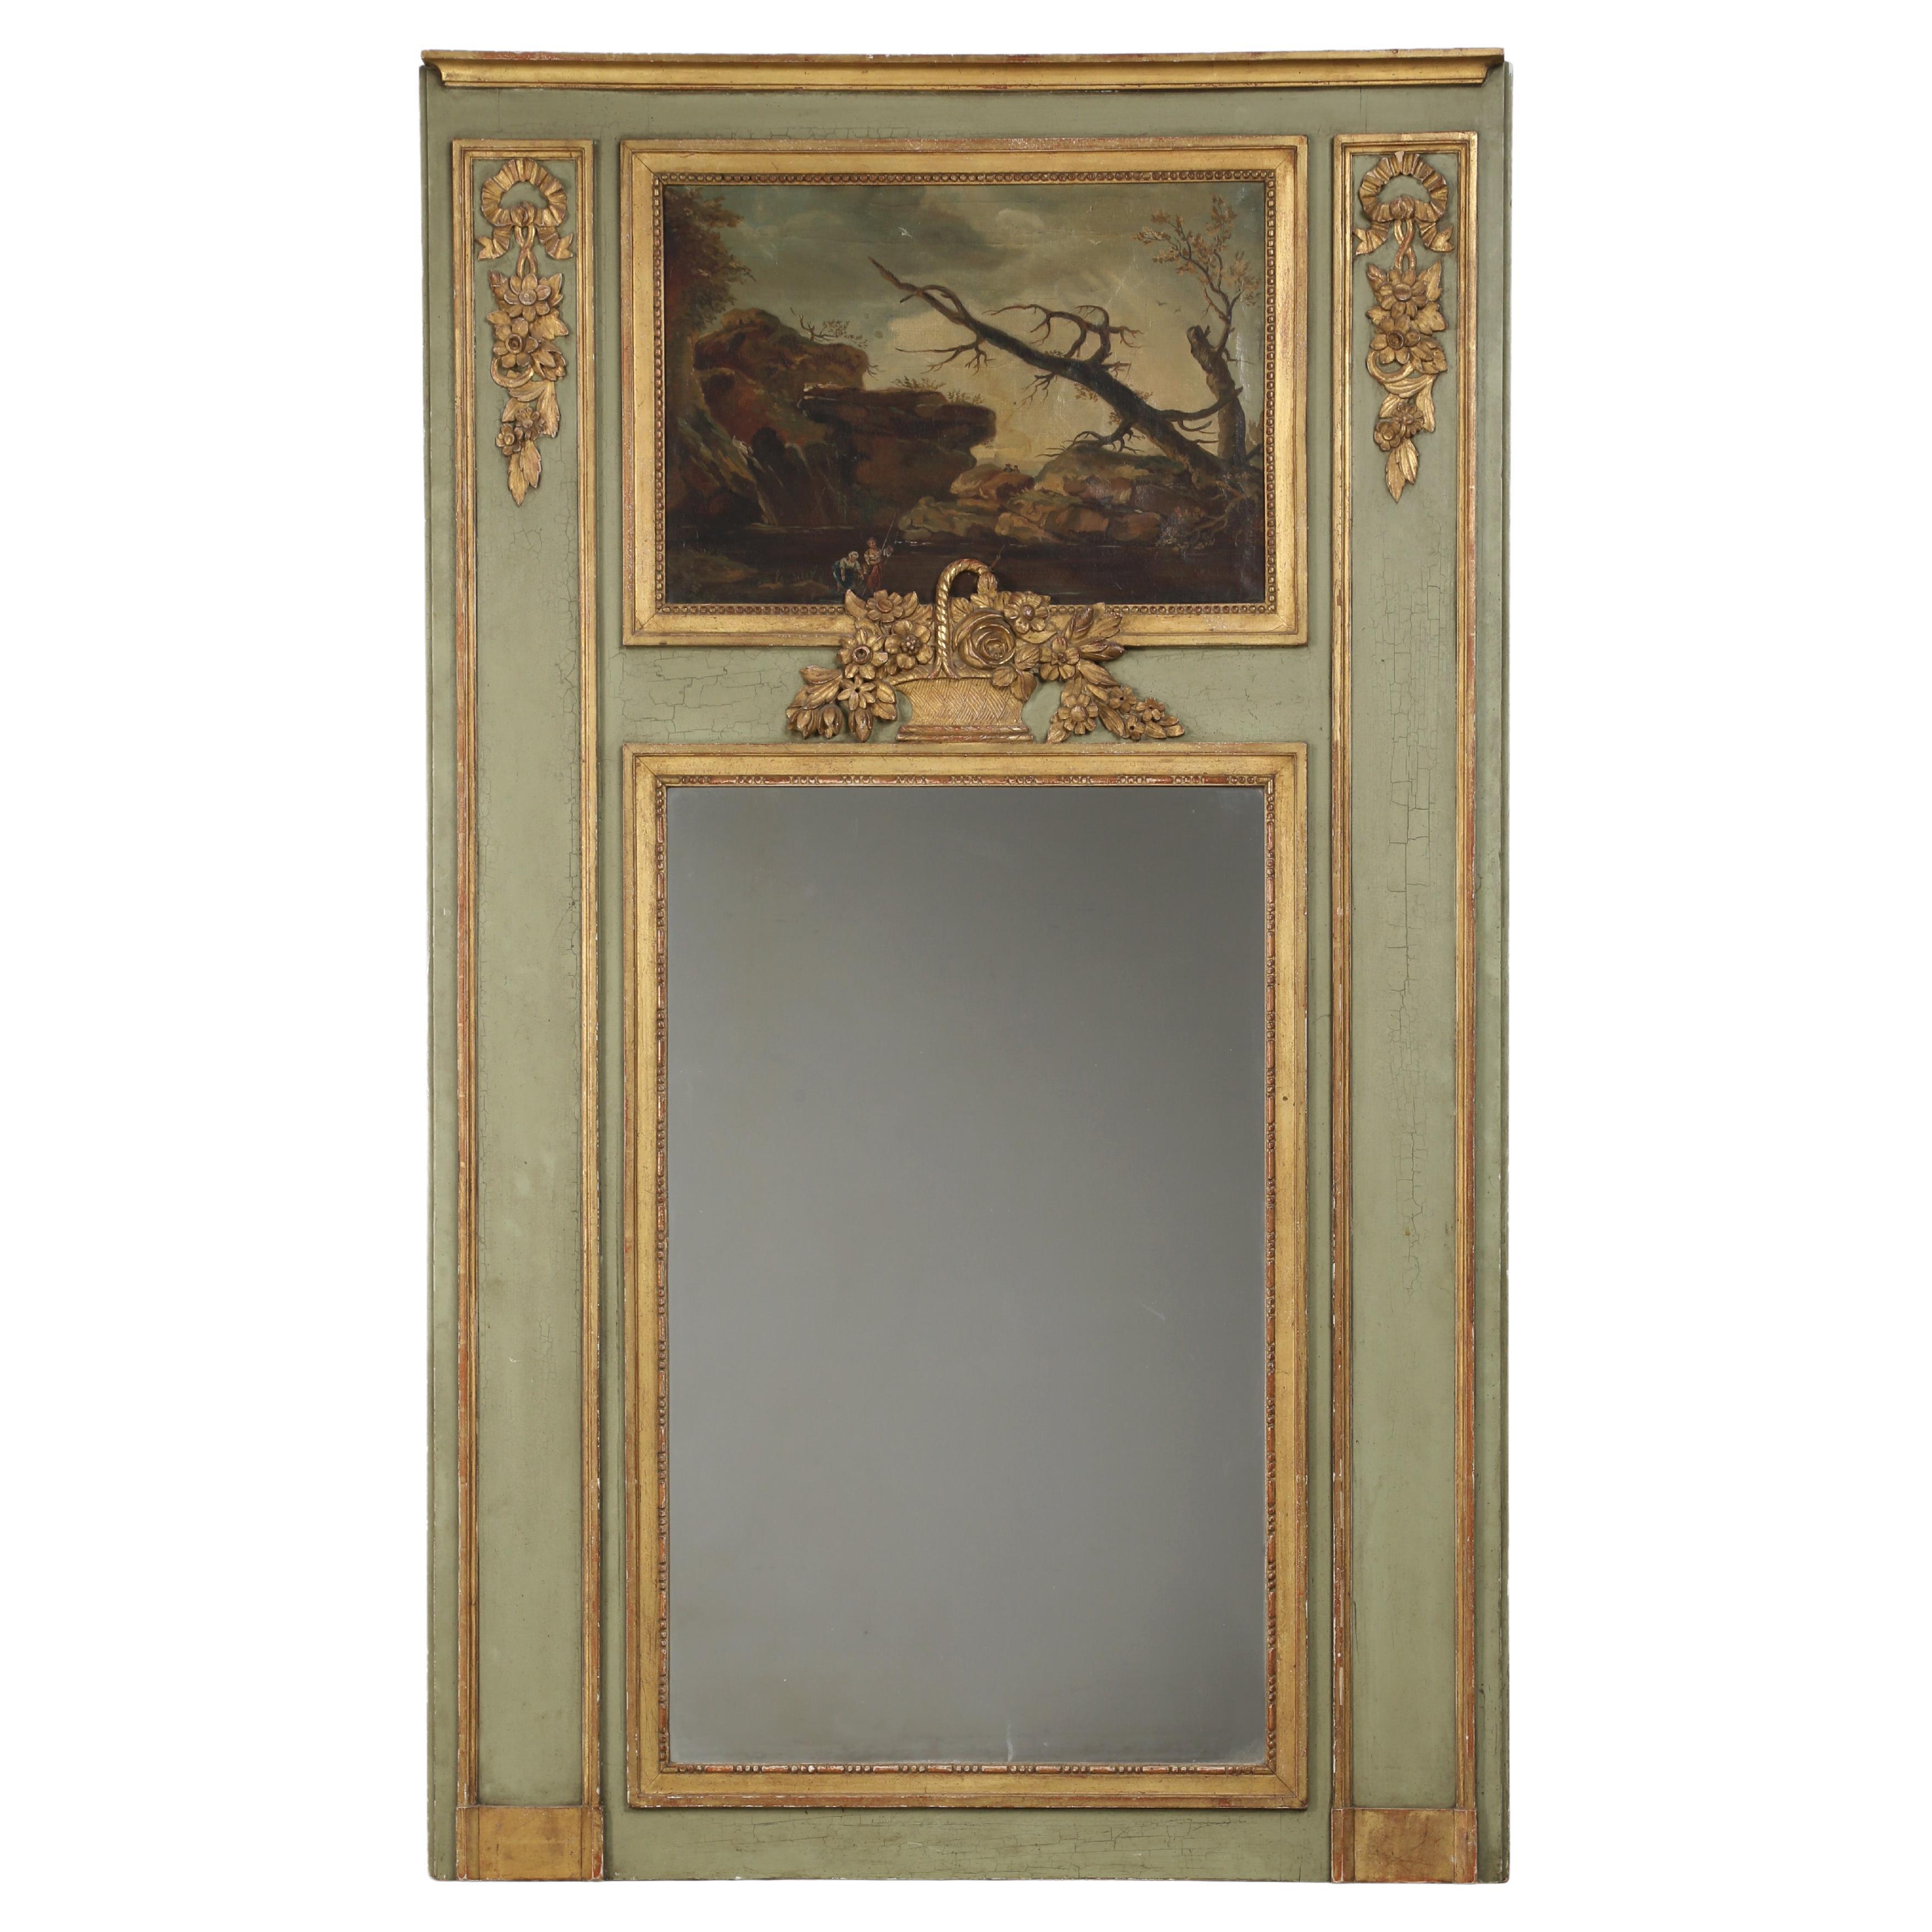 Antique French Trumeau Mirror Original Paint and Gilding Unrestored Late 1800's For Sale